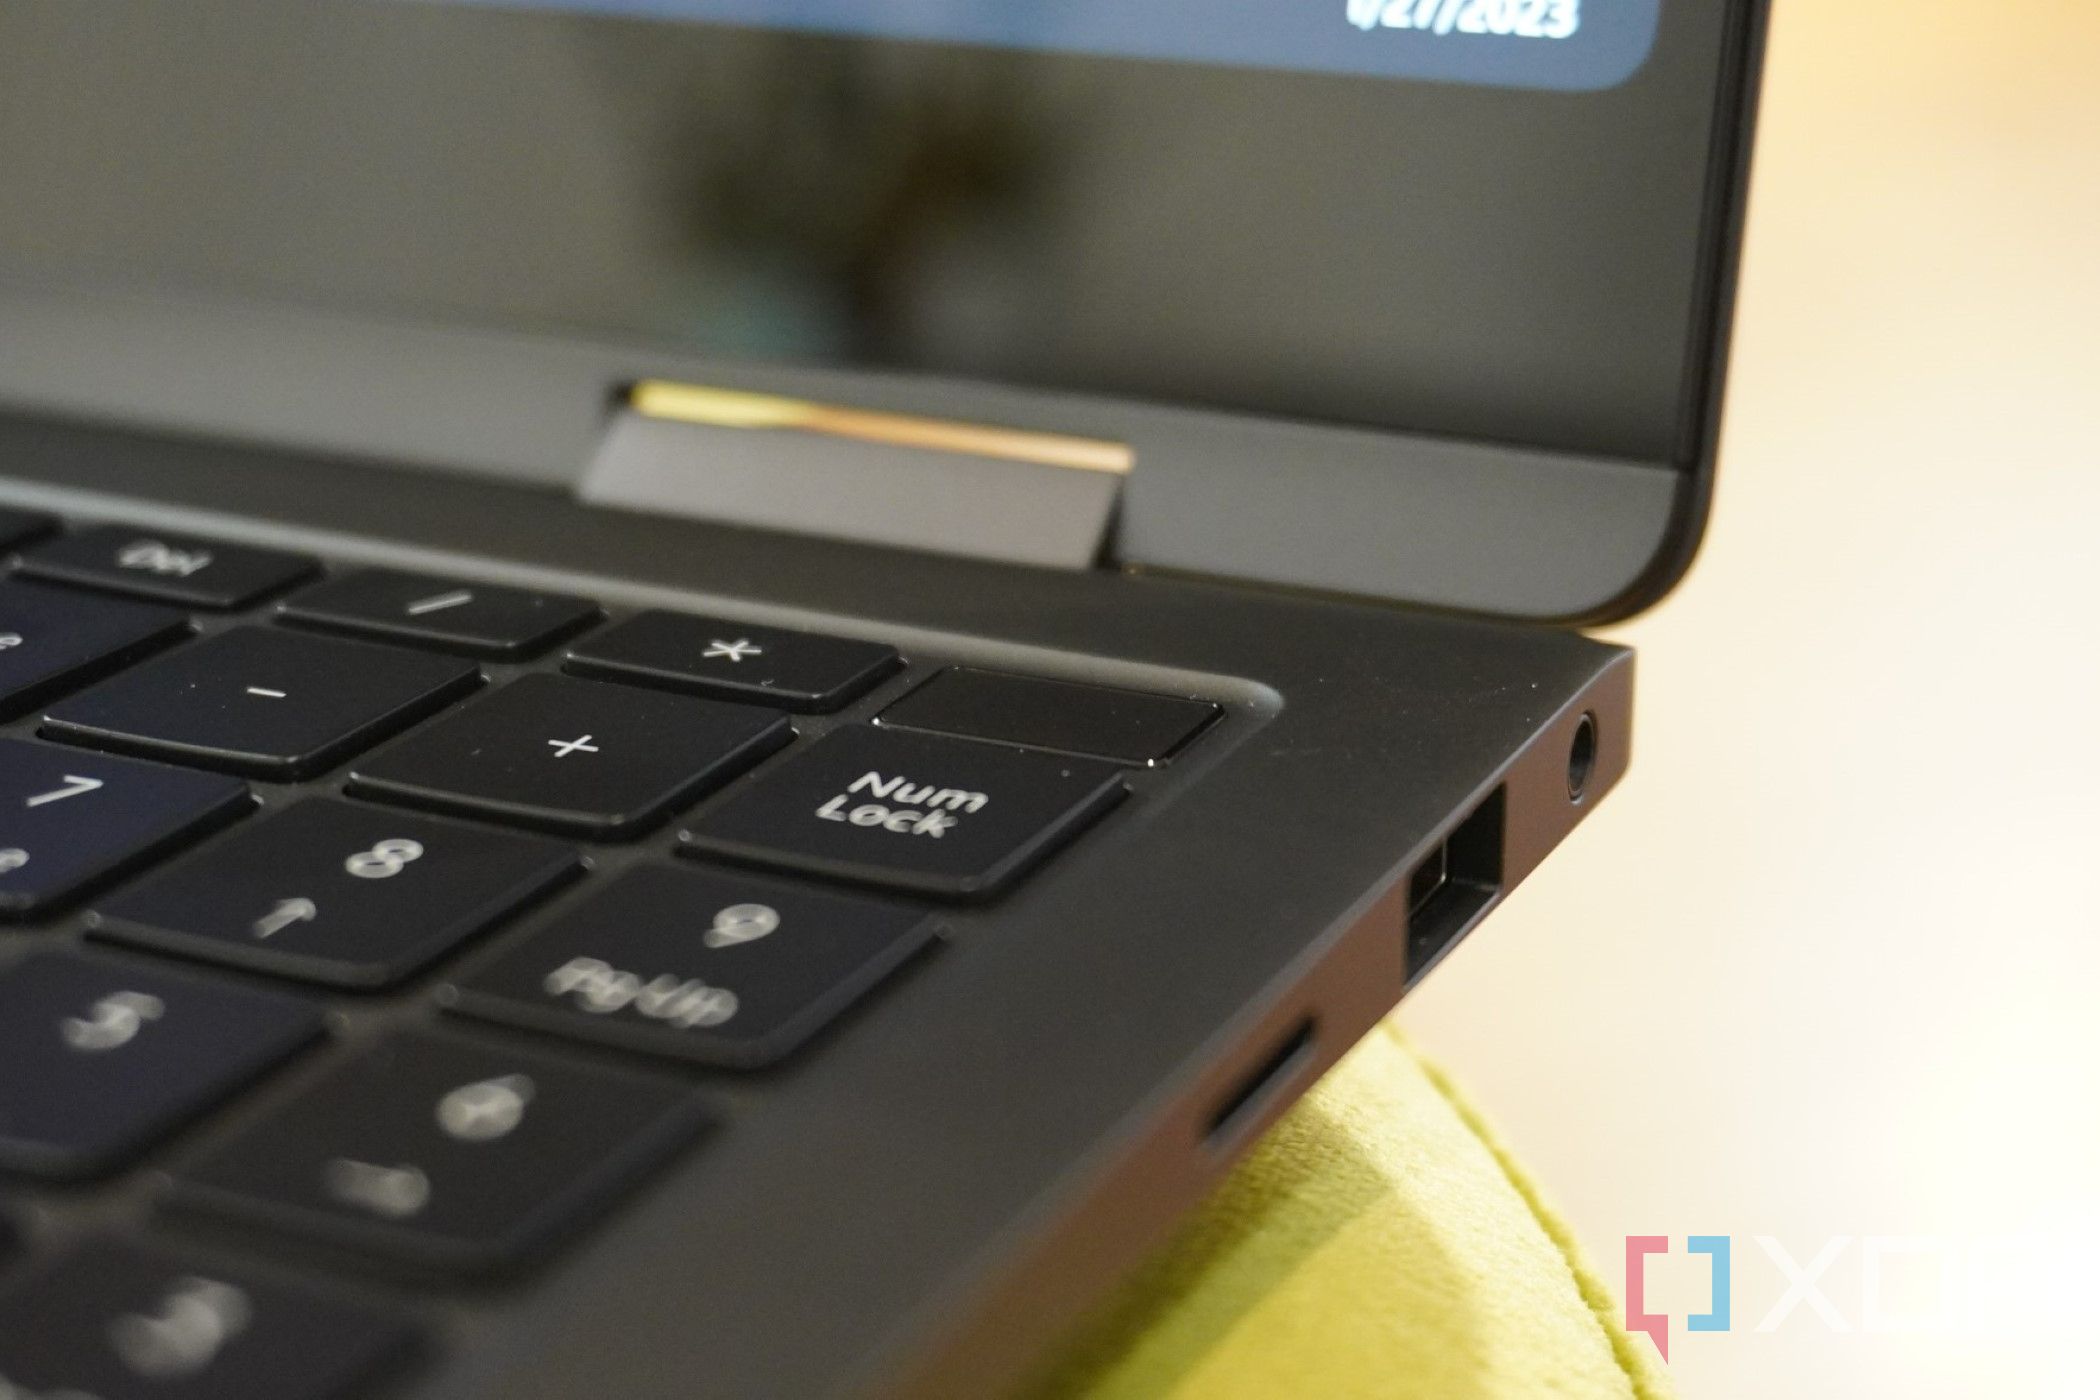 The ports on the right side of the Galaxy Book Pro 360